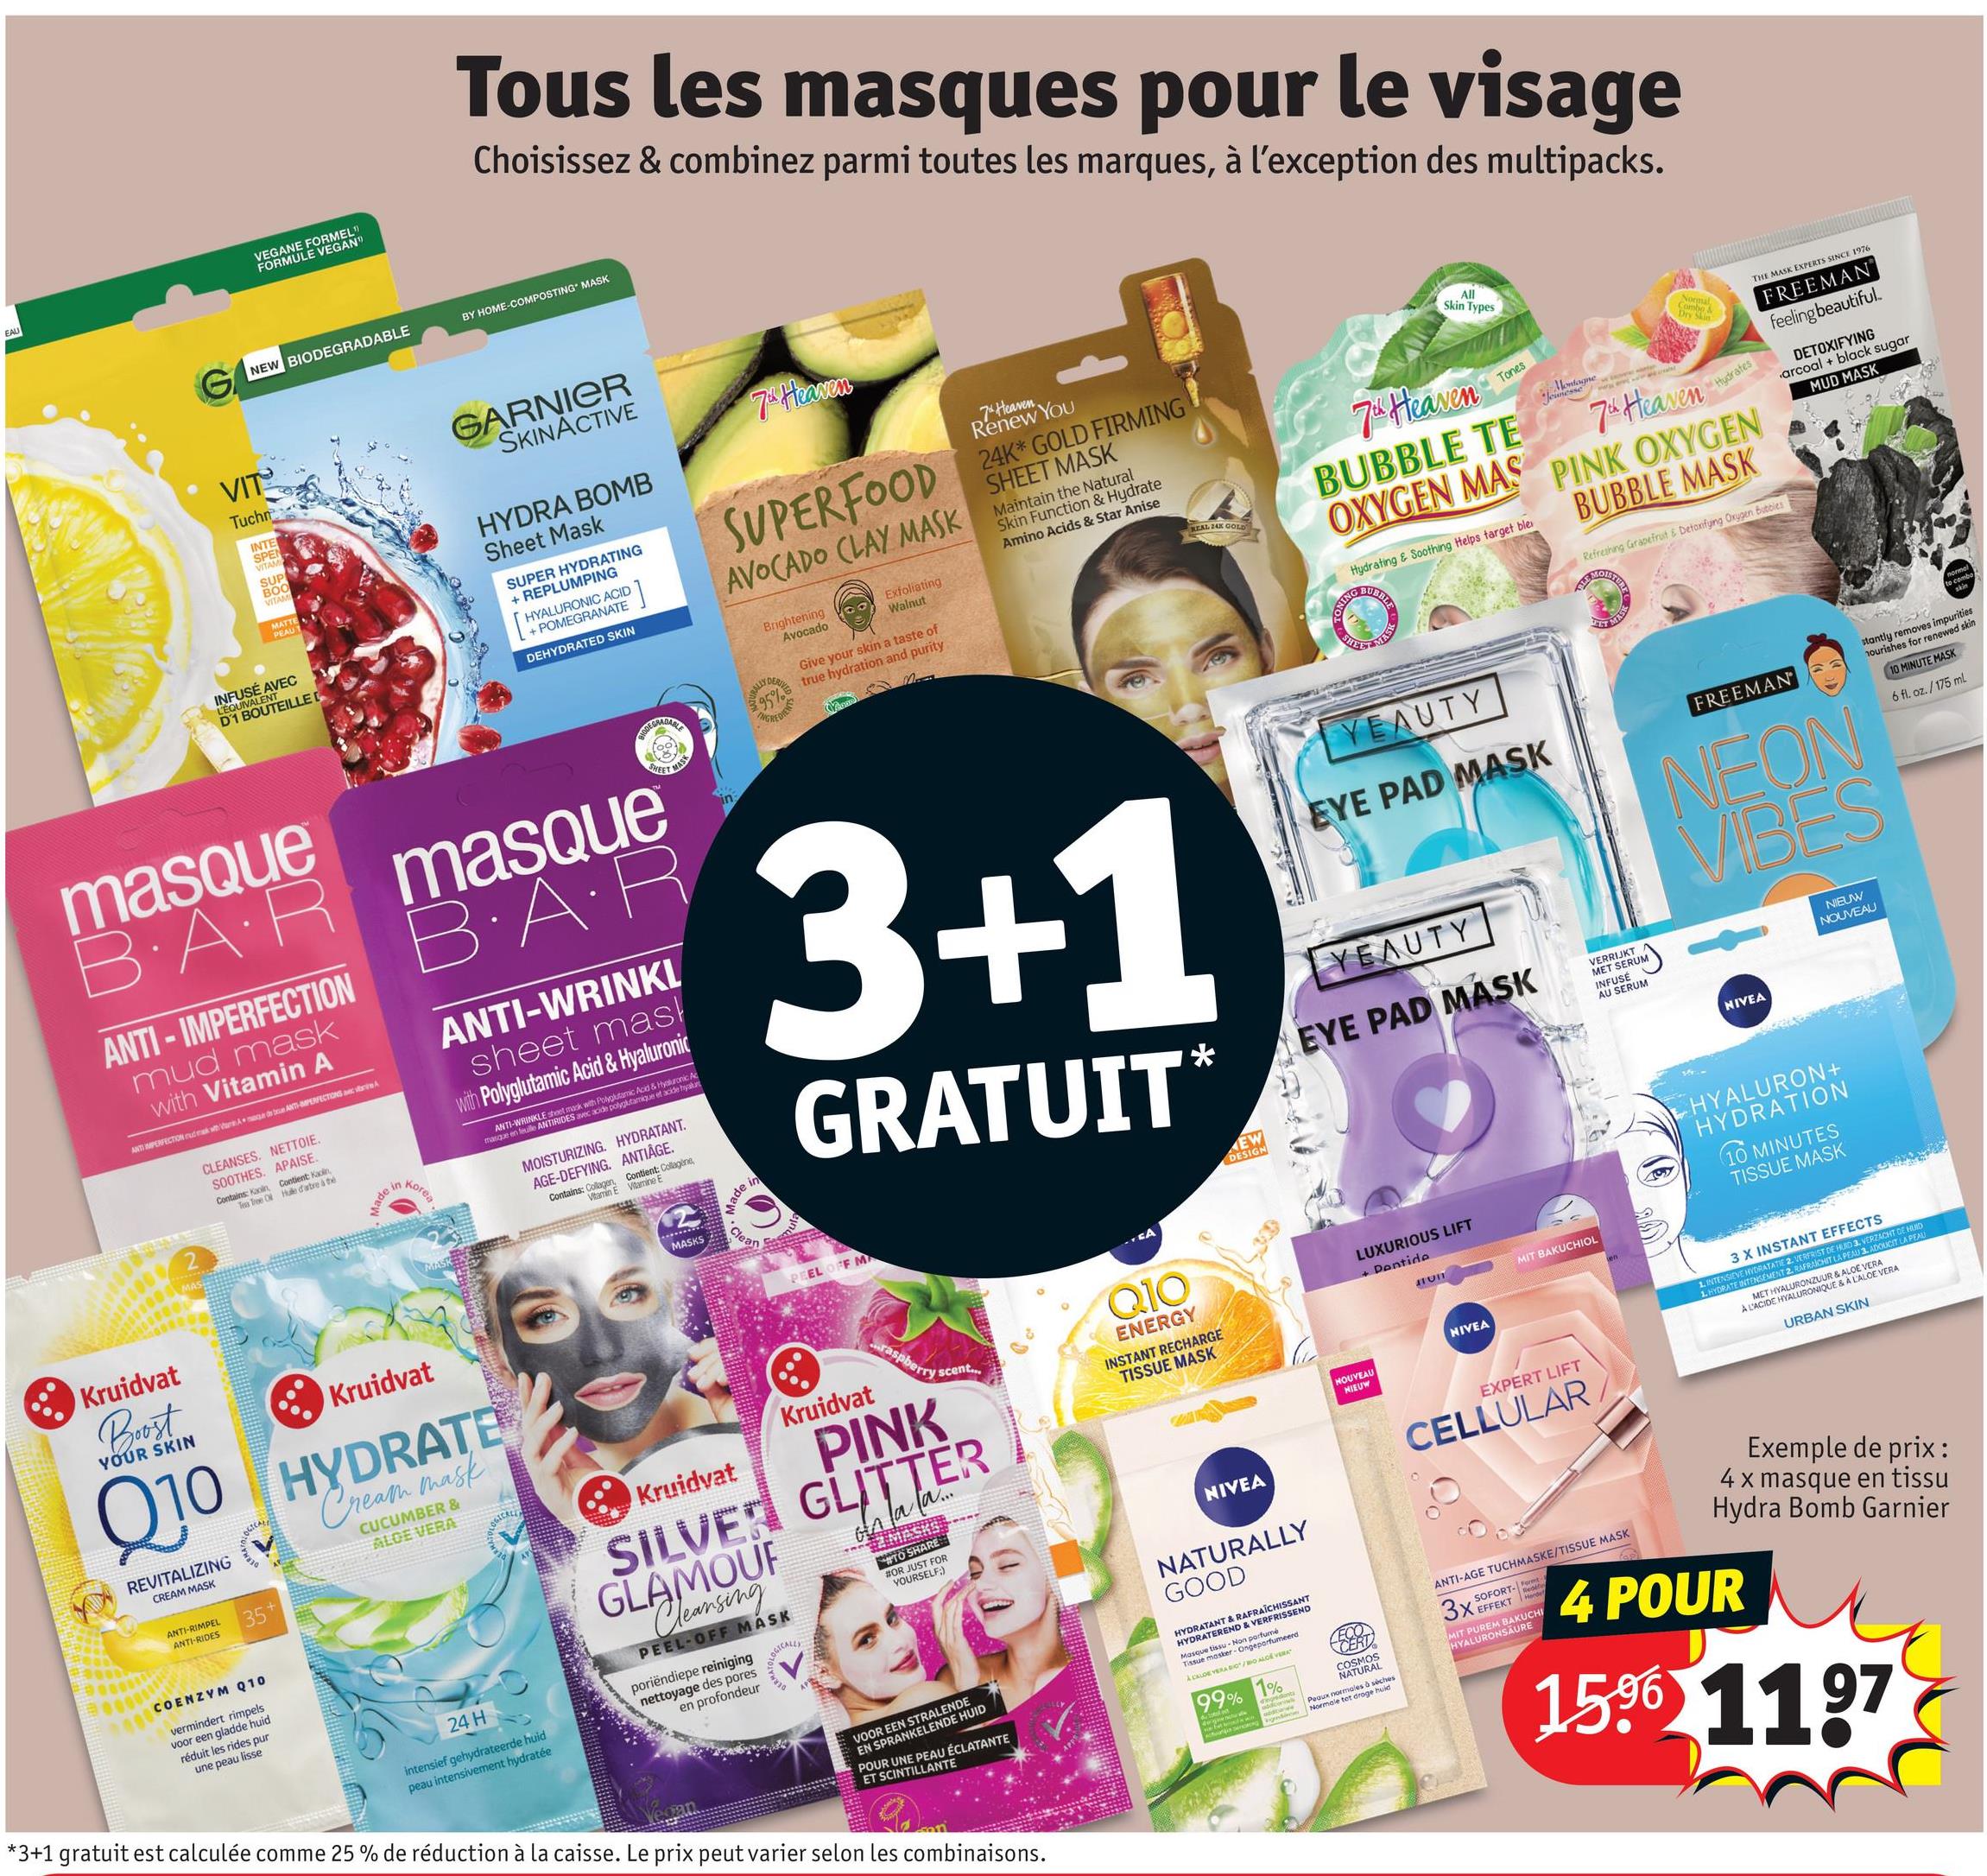 EAU
VEGANE FORMEL"
FORMULE VEGAN"
Tous les masques pour le visage
Choisissez & combinez parmi toutes les marques, à l'exception des multipacks.
NEW BIODEGRADABLE
BY HOME-COMPOSTING MASK
VIT
Tuchn
INTE
SPEN
VITAM
SUP
BOO
VITAM
MATTE
PEAUT
INFUSÉ AVEC
LEQUIVALENT
D'1 BOUTEILLE [
masque
GARNIER
SKINACTIVE
HYDRA BOMB
Sheet Mask
SUPER HYDRATING
+ REPLUMPING
HYALURONIC ACID
+ POMEGRANATE
DEHYDRATED SKIN
]
BIODERMABLE
BAR masque
ANTI-IMPERFECTION
mud mask
with Vitamin A
ANTI IMPERFECTION udmak with Van Ad be ANTI-IMPERFECTIONS A
CLEANSES. NETTOIE.
SOOTHES. APAISE.
Contains: Kaoin, Contient Kaolin,
Tea Tree Of Hule d'atre à thé
Made in
Korea
MASK
B·A·R
ANTI-WRINKL
sheet mask
with Polyglutamic Acid & Hyaluronic
ANTI-WRINKLE sheet mask with Polyglutamic Acid & Hyaluronic Ac
masque en feuille ANTIRIDES avec acide po
de polyglutamique et acide hyakurt
MOISTURIZING. HYDRATANT.
AGE-DEFYING. ANTIÂGE.
Contains: Collagen, Contient: Collagène,
Vitamin E Vitamine E
MASKS
Made in
lean
SHEET
7 Heaven
7 Heaven.
Renew You
24K GOLD FIRMING
SUPERFOOD SHEET MASK
AVOCADO CLAY MASK
RALLY DER
MASK
95%
NGREDIE
Brightening
Avocado
Exfoliating
Walnut
Give your skin a taste of
true hydration and purity
Maintain the Natural
Skin Function & Hydrate
Amino Acids & Star Anise
3+1
GRATUIT
*
EAL 24K GOLD
All
Skin Types
7th Heaven
Tones
Montagne
7th Heaven
Normal
Combo &
Dry Skin
Hydrates
BUBBLE TE
OXYGEN MAS PINK OXYGEN
Hydrating & Soothing Helps target ble
ONING BUBBLE
YEAUTY
EYE PAD MASK
YEAUTY
EYE PAD MASK
VERRIJKT
MET SERUM
INFUSÉ
AU SERUM
BUBBLE MASK
Refreshing Grapefruit & Detoxifying Oxygen bubbles
FREEMAN
NEON
VIBES
NIEUW
NOUVEAU
THE MASK EXPERTS SINCE 1976
FREEMAN
feeling beautiful.
DETOXIFYING
arcoal + black sugar
MUD MASK
normel
to combo
skin
stantly removes impurities
nourishes for renewed skin
10 MINUTE MASK
6 fl. oz./175 ml
Kruidvat
Boost
YOUR SKIN
Kruidvat
Q10 HYDRATE
REVITALIZING
CREAM MASK
ANTI-RIMPEL
ANTI-RIDES
COENZYM Q10
vermindert rimpels
voor een gladde huid
réduit les rides pur
une peau lisse
35+
Cream mask
CUCUMBER &
ALOE VERA
24 H
intensief gehydrateerde huid
peau intensivement hydratée
Kruidvat
PEEL OFF M
Kruidvat
...raspberry scent...
PINK
SILVER GLITTER
GLAMOUF
Cleansing
PEEL-OFF MASK
poriëndiepe reiniging
nettoyage des pores
en profondeur
OGICALLY
Ga
#Z MASKS
#TO SHARE
#OR JUST FOR
YOURSELF:)
N....
CA
Q10
ENERGY
INSTANT RECHARGE
TISSUE MASK
NIVEA
EW
DESIGN
LUXURIOUS LIFT
+ Pentide
Un
MIT BAKUCHIOL
NIVEA
NOUVEAU
NIEUW
NIVEA
HYALURON+
HYDRATION
10 MINUTES
TISSUE MASK
EXPERT LIFT
CELLULAR.
3 X INSTANT EFFECTS
1. INTENSIVE HYDRATATIE 2. VERFRIST DE HURD 3. VERZACHT DE HUID
1. HYDRATE INTENSEMENT 2. RAFRAICHIT LA PEAU 3. ADOUCIT LA PEAU
MET HYALURONZUUR & ALOE VERA
À L'ACIDE HYALURONIQUE & A LALOE VERA
URBAN SKIN
VOOR EEN STRALENDE
EN SPRANKELENDE HUID
POUR UNE PEAU ÉCLATANTE
ET SCINTILLANTE
*3+1 gratuit est calculée comme 25 % de réduction à la caisse. Le prix peut varier selon les combinaisons.
NATURALLY
GOOD
HYDRATANT & RAFRAICHISSANT
HYDRATEREND & VERFRISSEND
Masque tissu-Non parfumé
Tissue masker-Ongeparfumeerd
A CALOE VERA BIO/BIO ALOE VERA
99% 1%
ingrediants
LECO
CERT
COSMOS
NATURAL
Peaux normales à séches
Normale tot droge huid
ANTI-AGE TUCHMASKE/TISSUE MASK
SOFORT-Form
3X EFFEKT
MIT PUREM BAKUCHI
HYALURONSAURE
Exemple de prix:
4 x masque en tissu
Hydra Bomb Garnier
4 POUR
1596 1197